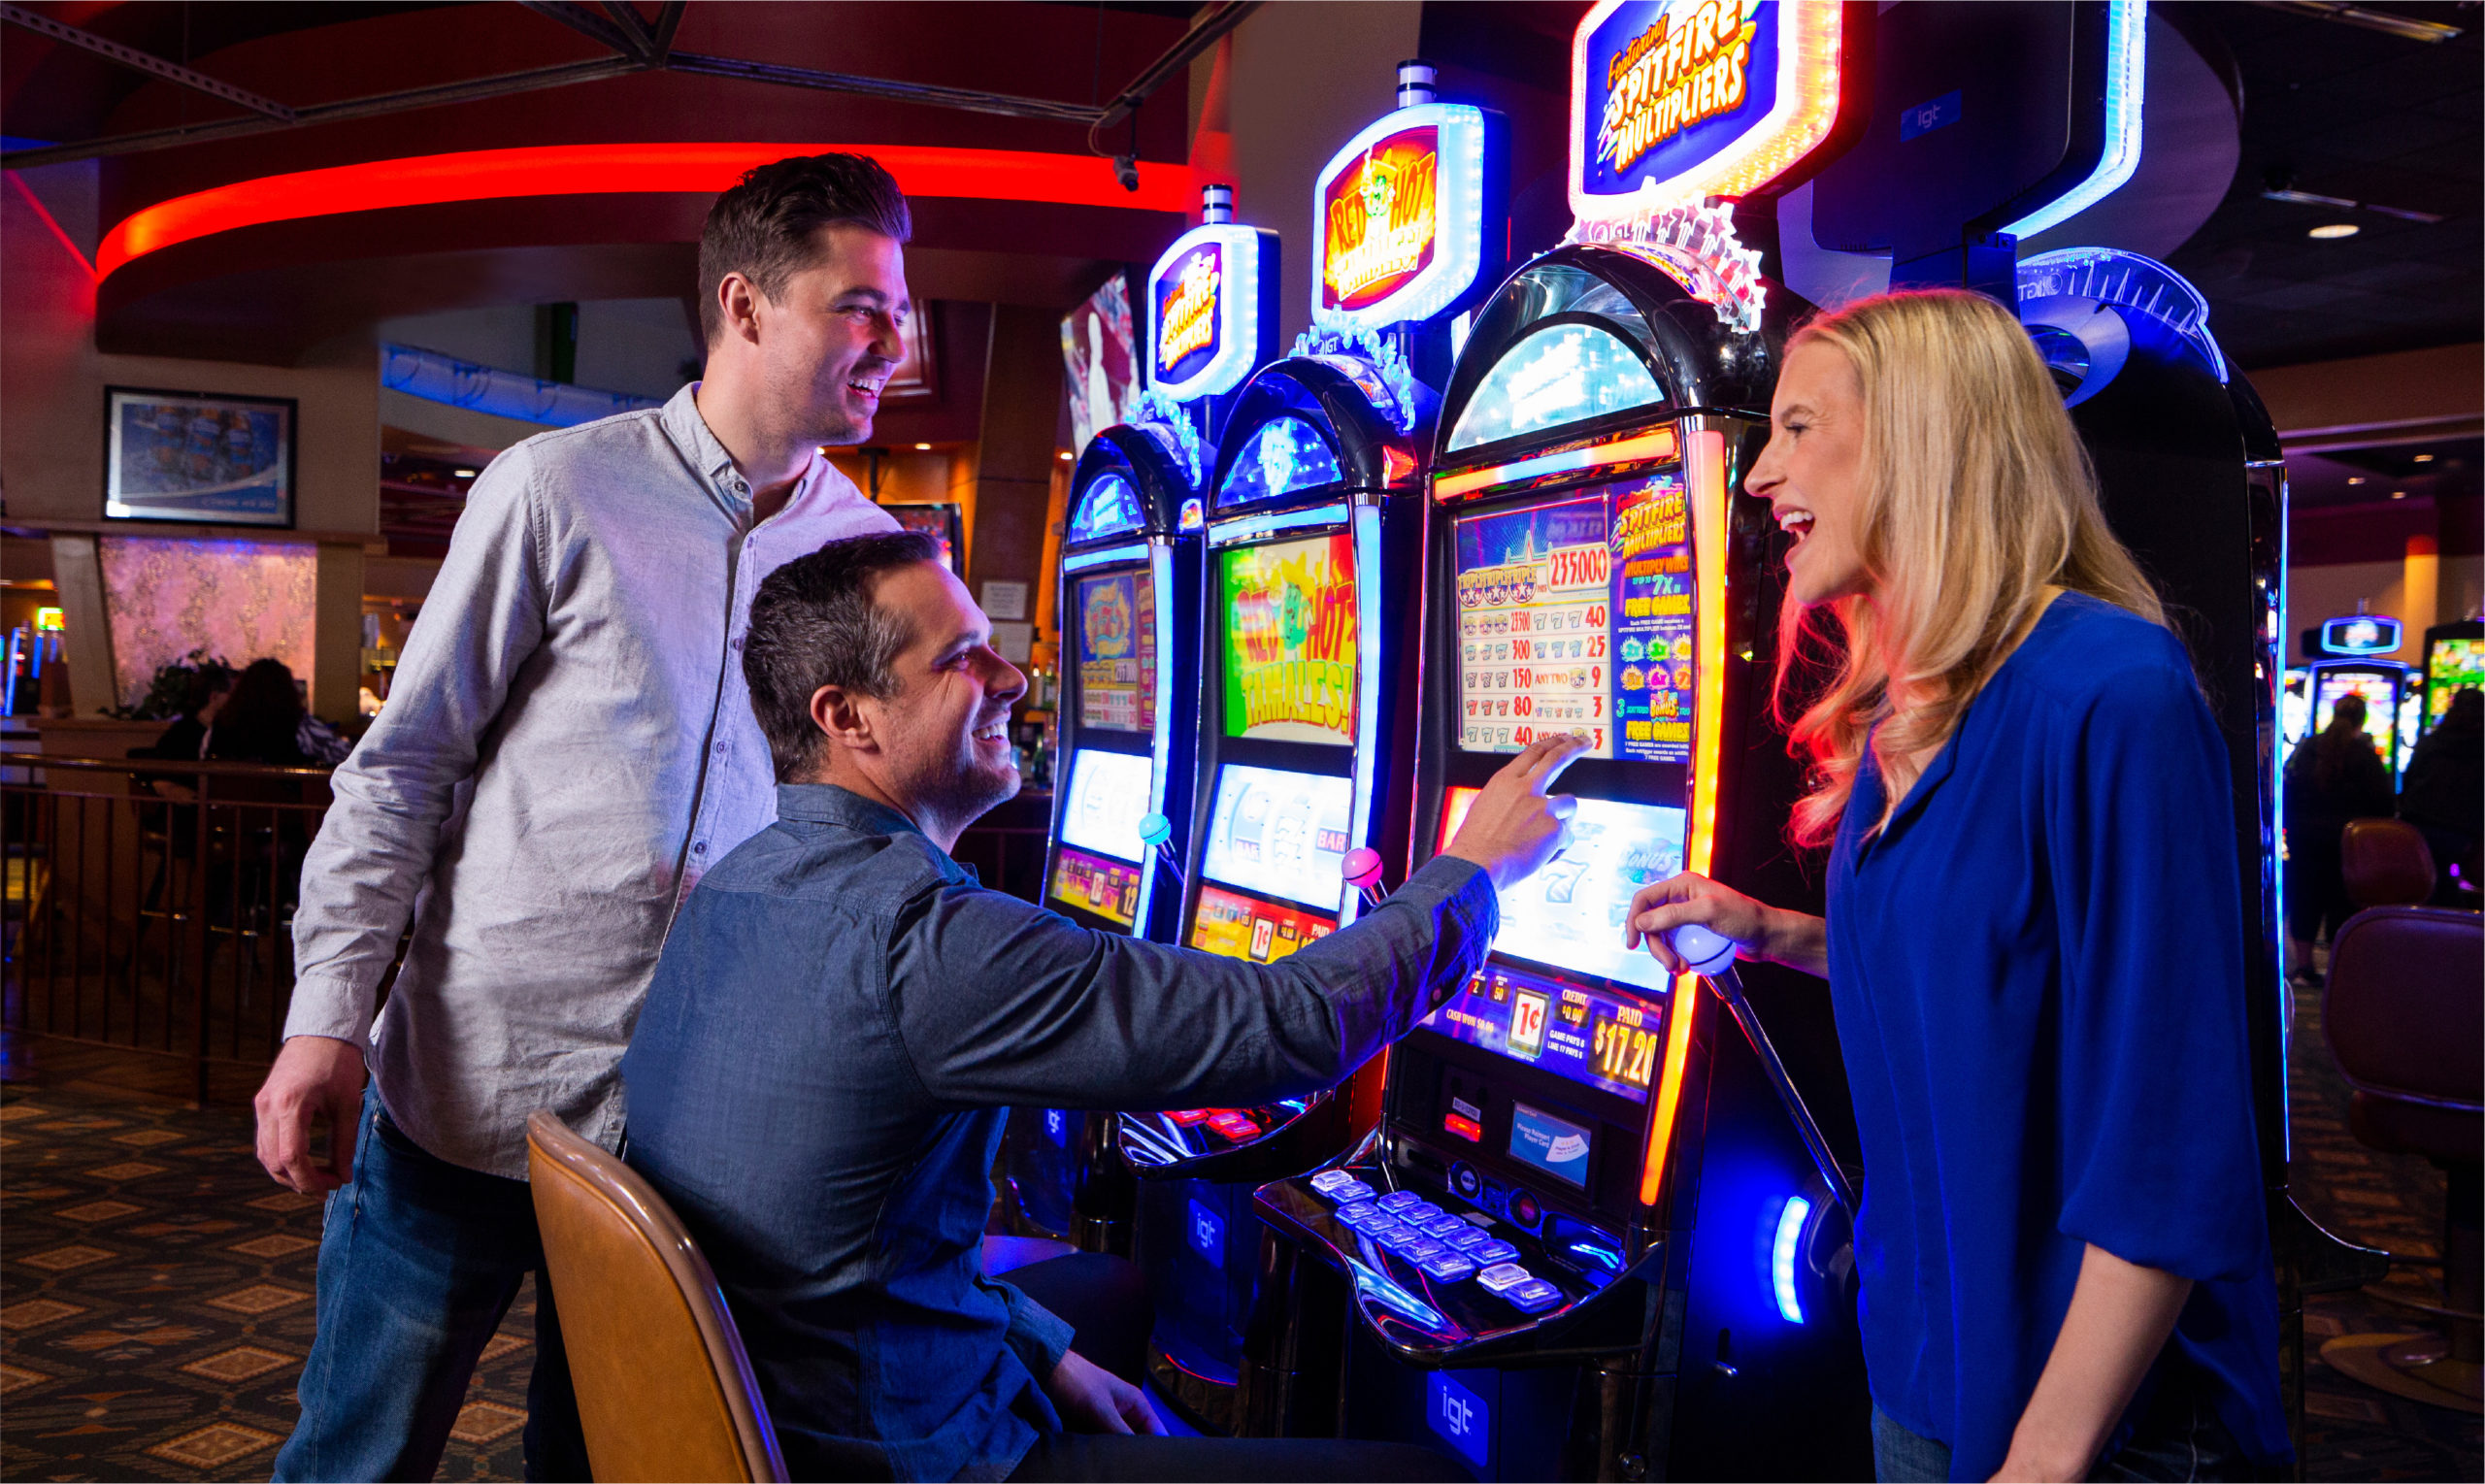 10 Reasons to Visit New Mexico Casinos: Inn of the Mountain Gods